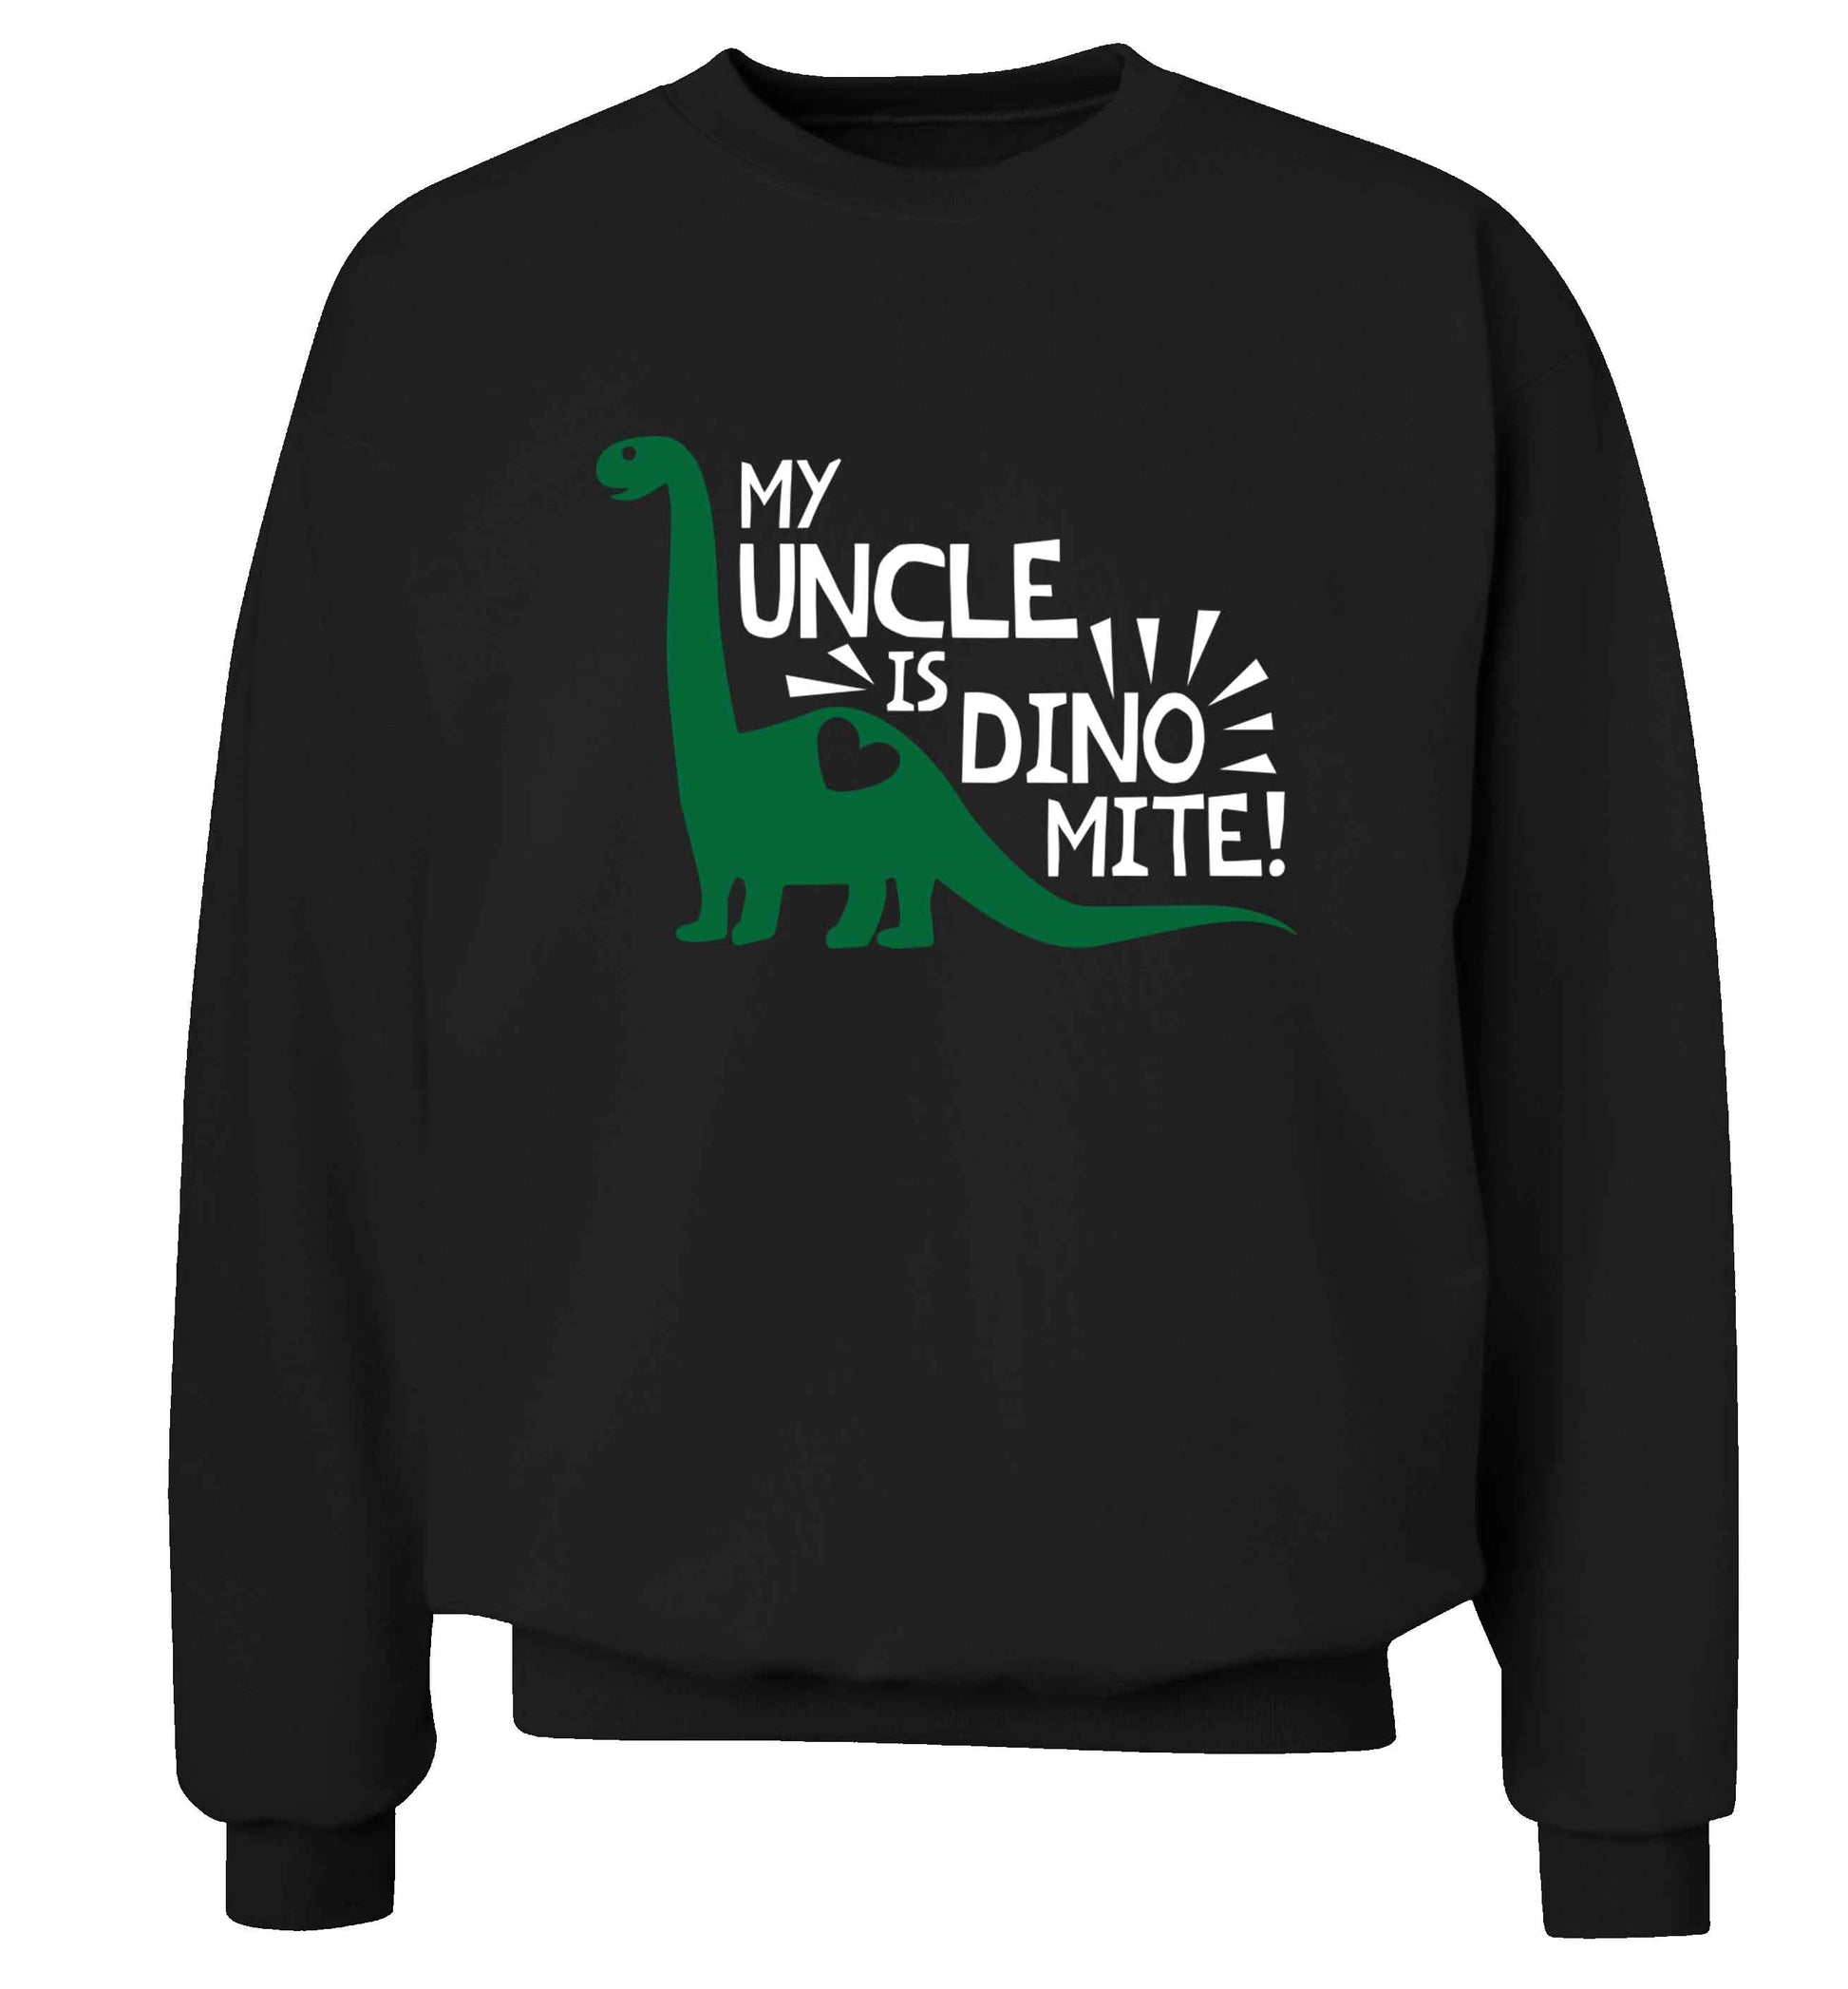 My uncle is dinomite! Adult's unisex black Sweater 2XL